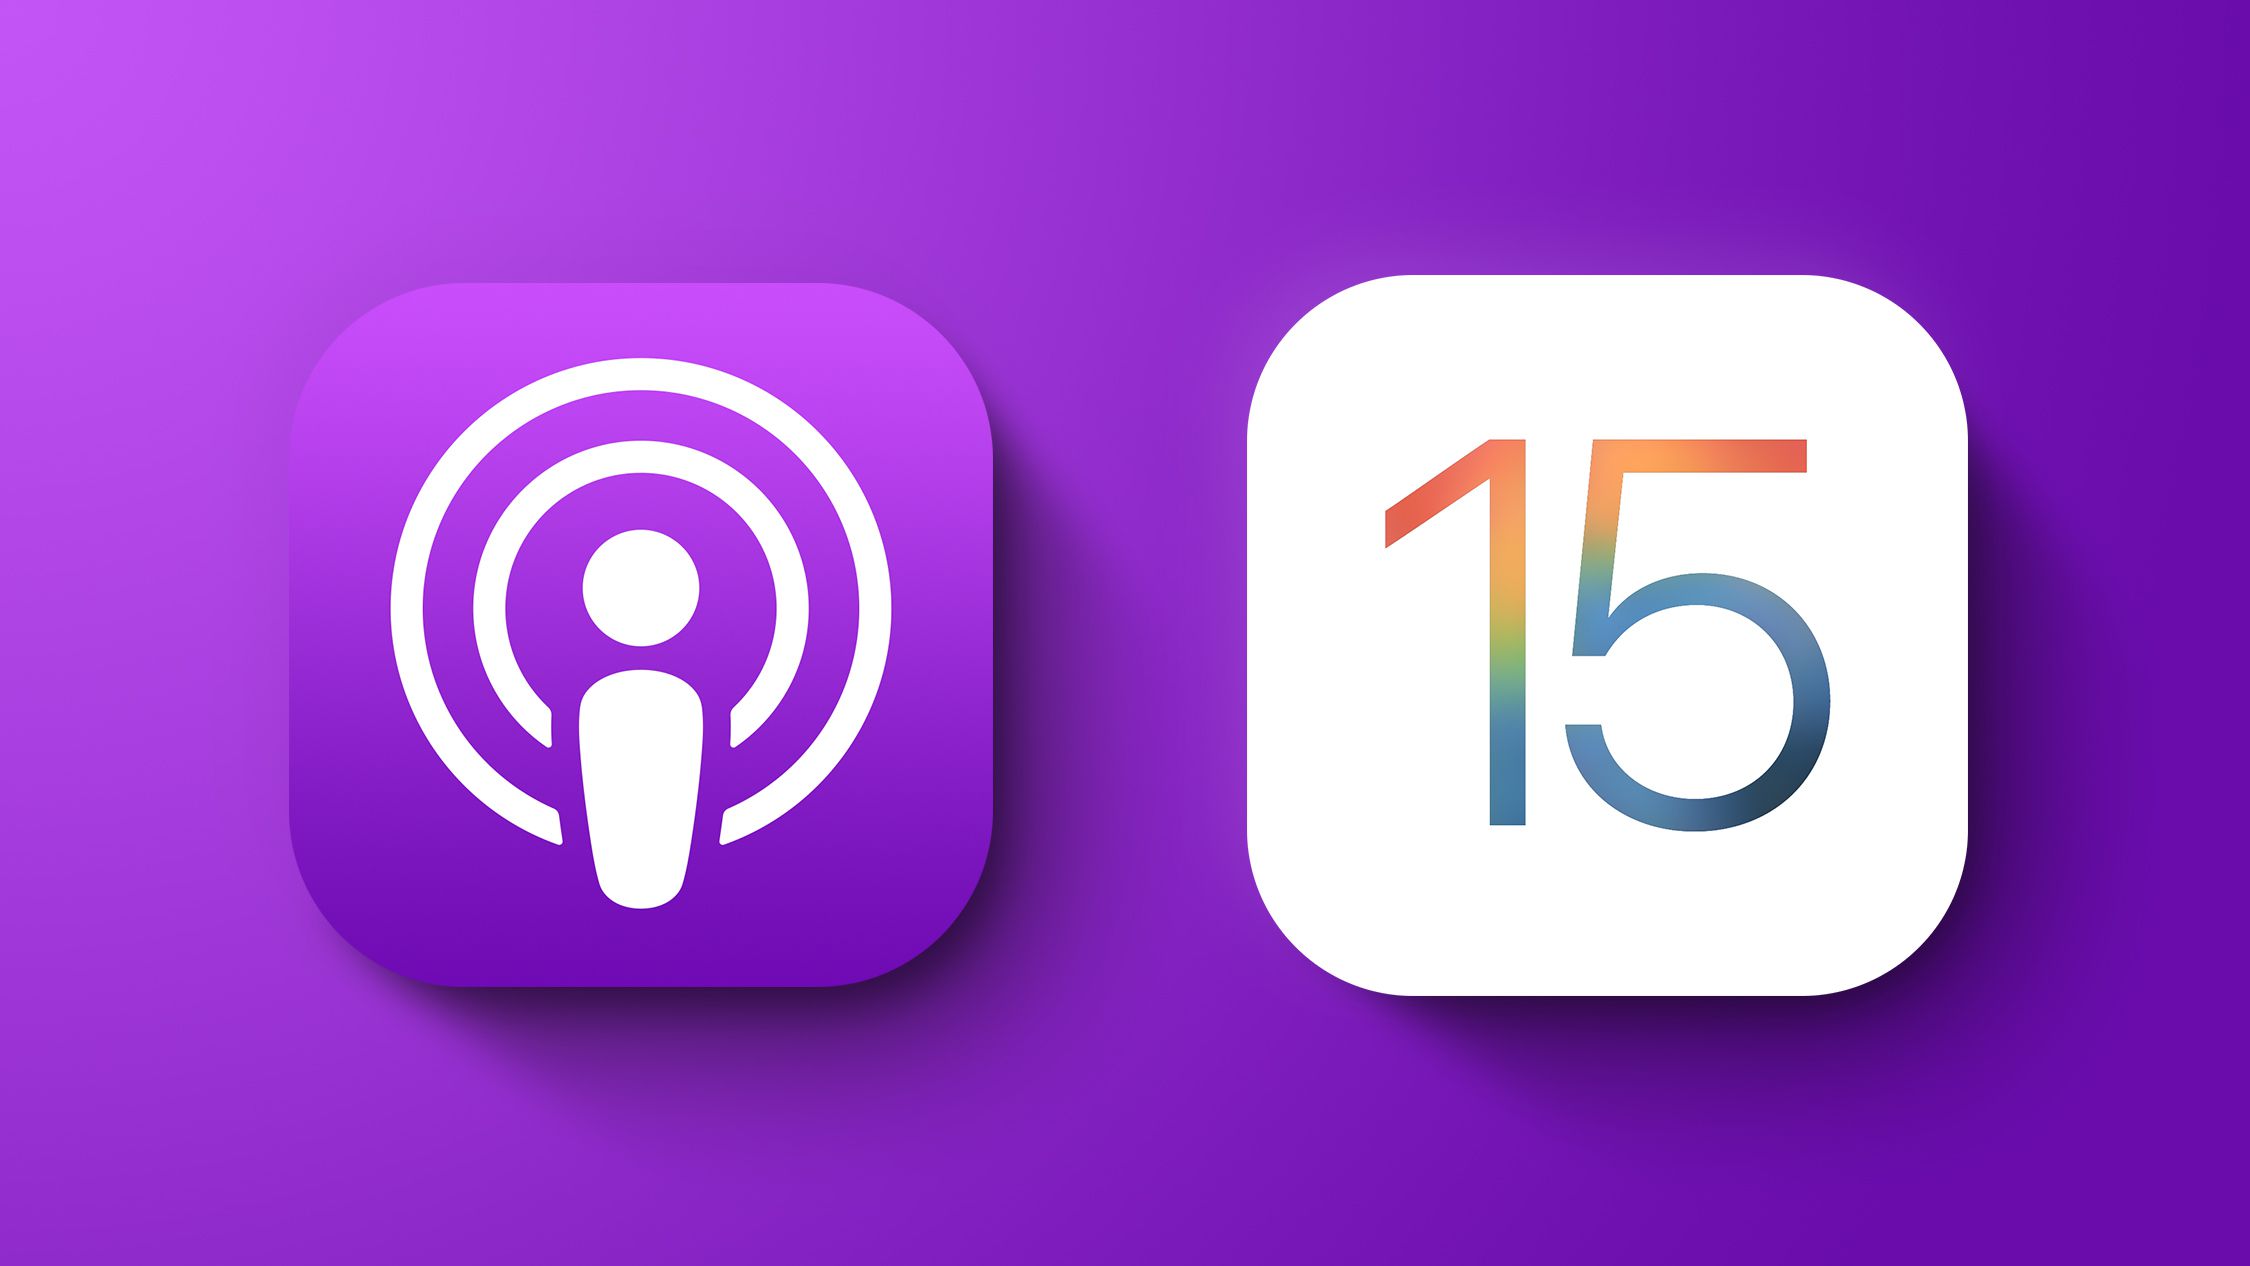 does apple have a podcast app for mac